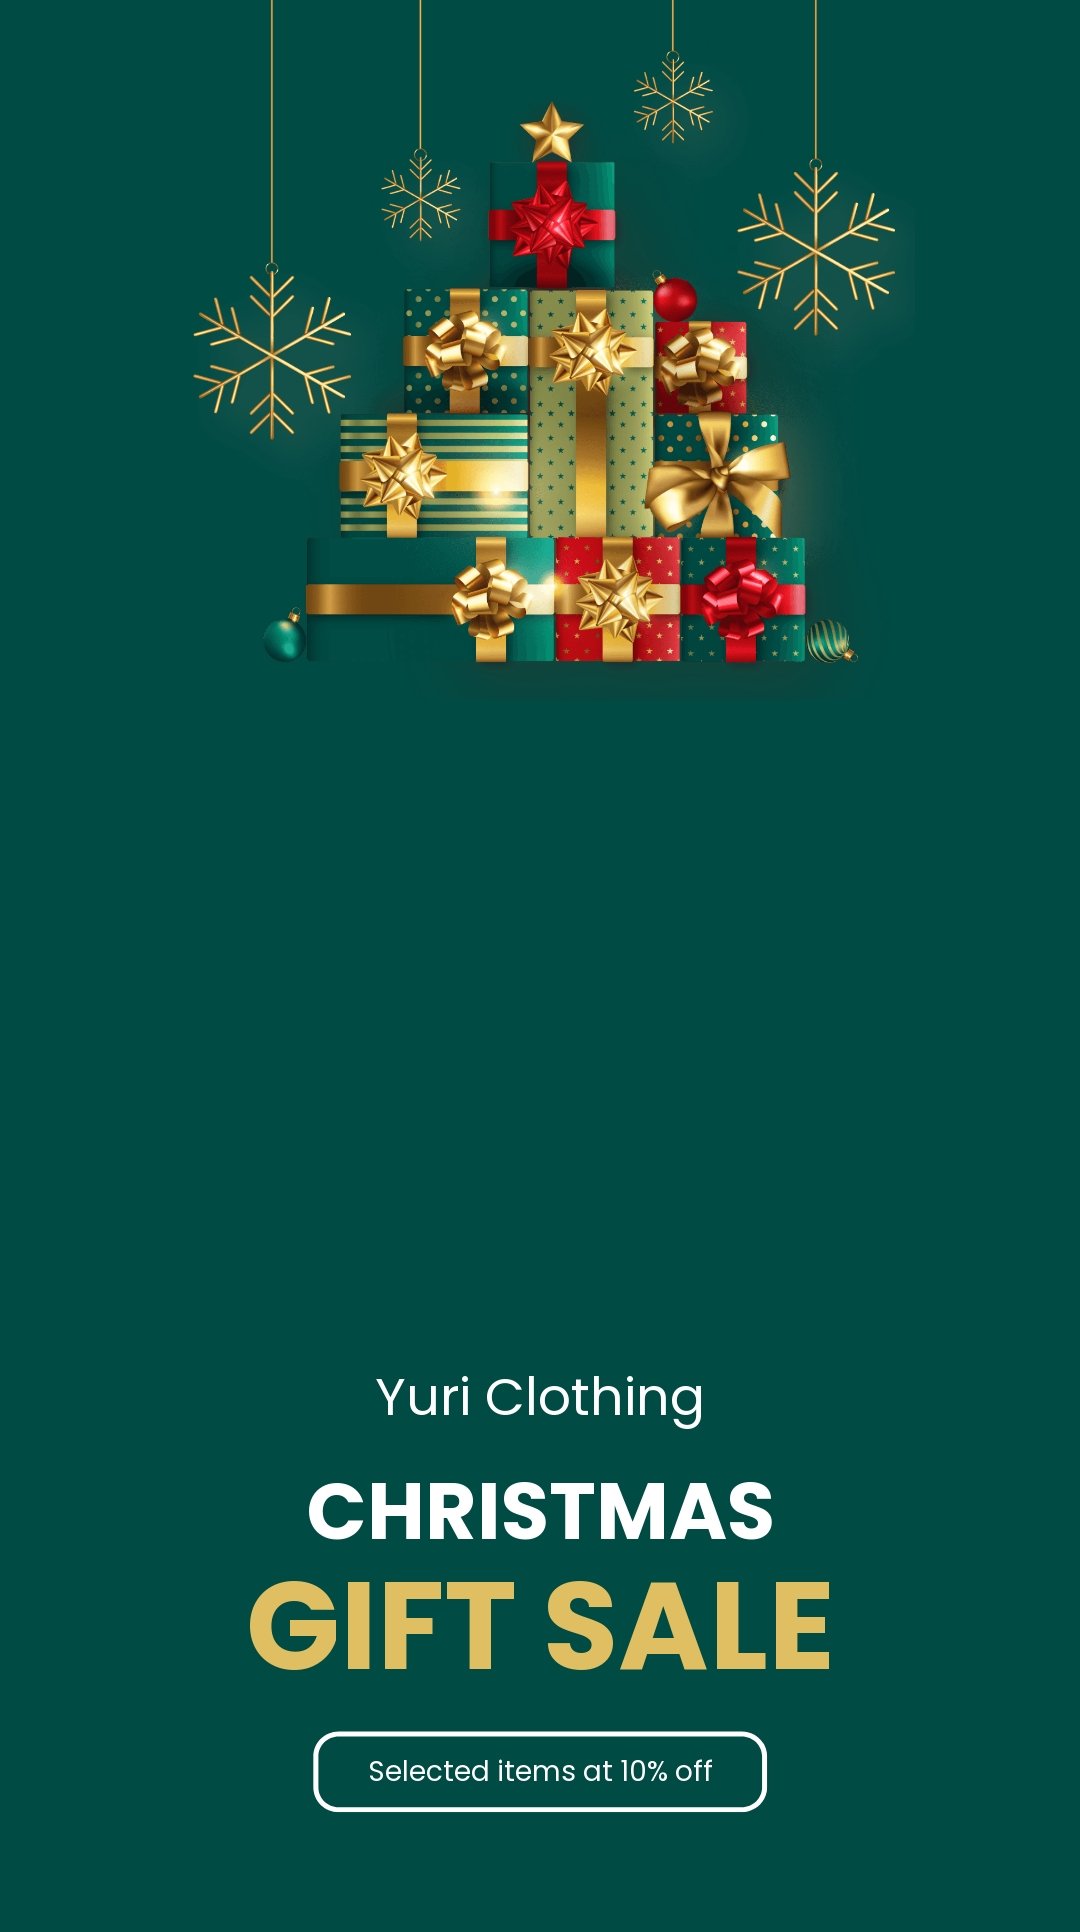 Free Christmas Gift Sale Snapchat Geofilter Template